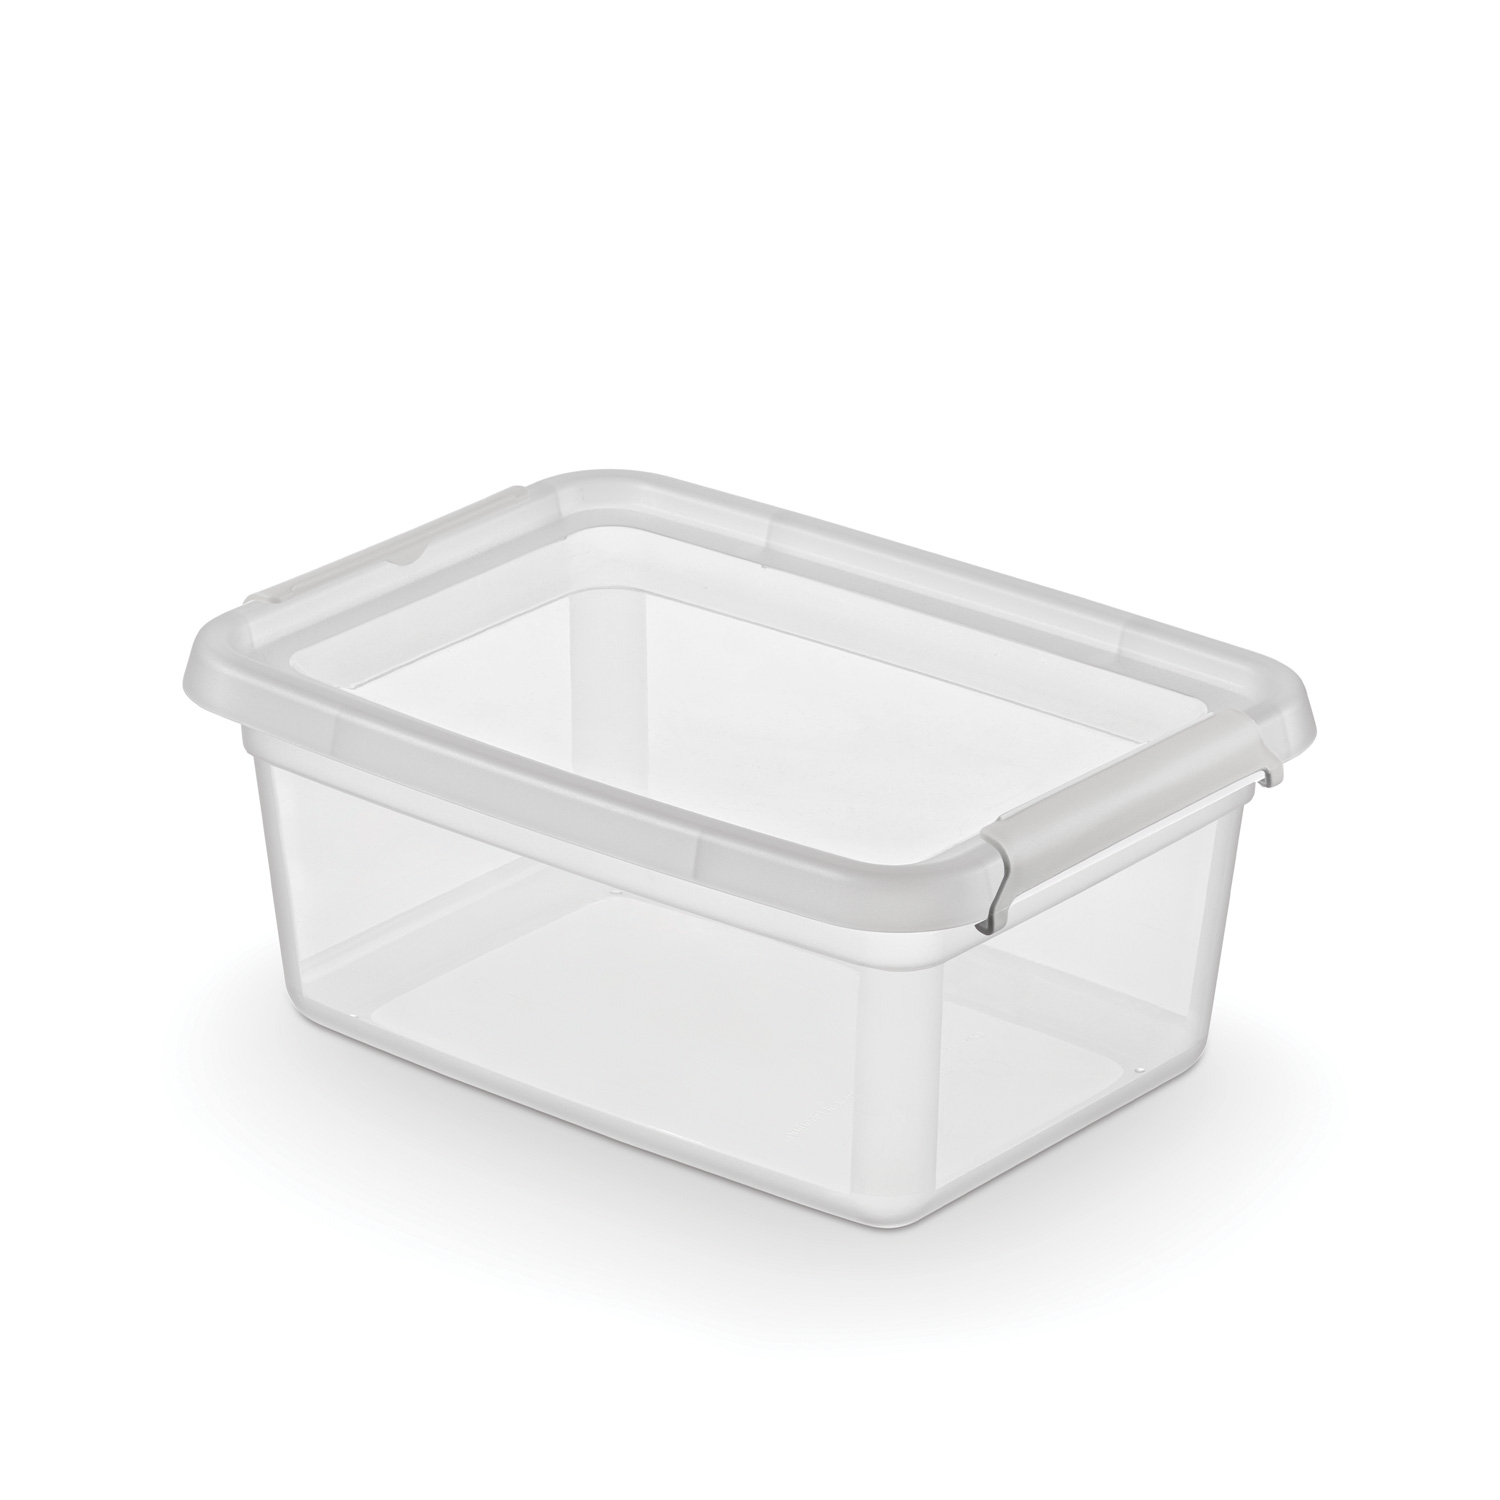 Basestore container with lid and clips, 28x19x13 cm, 4.5L